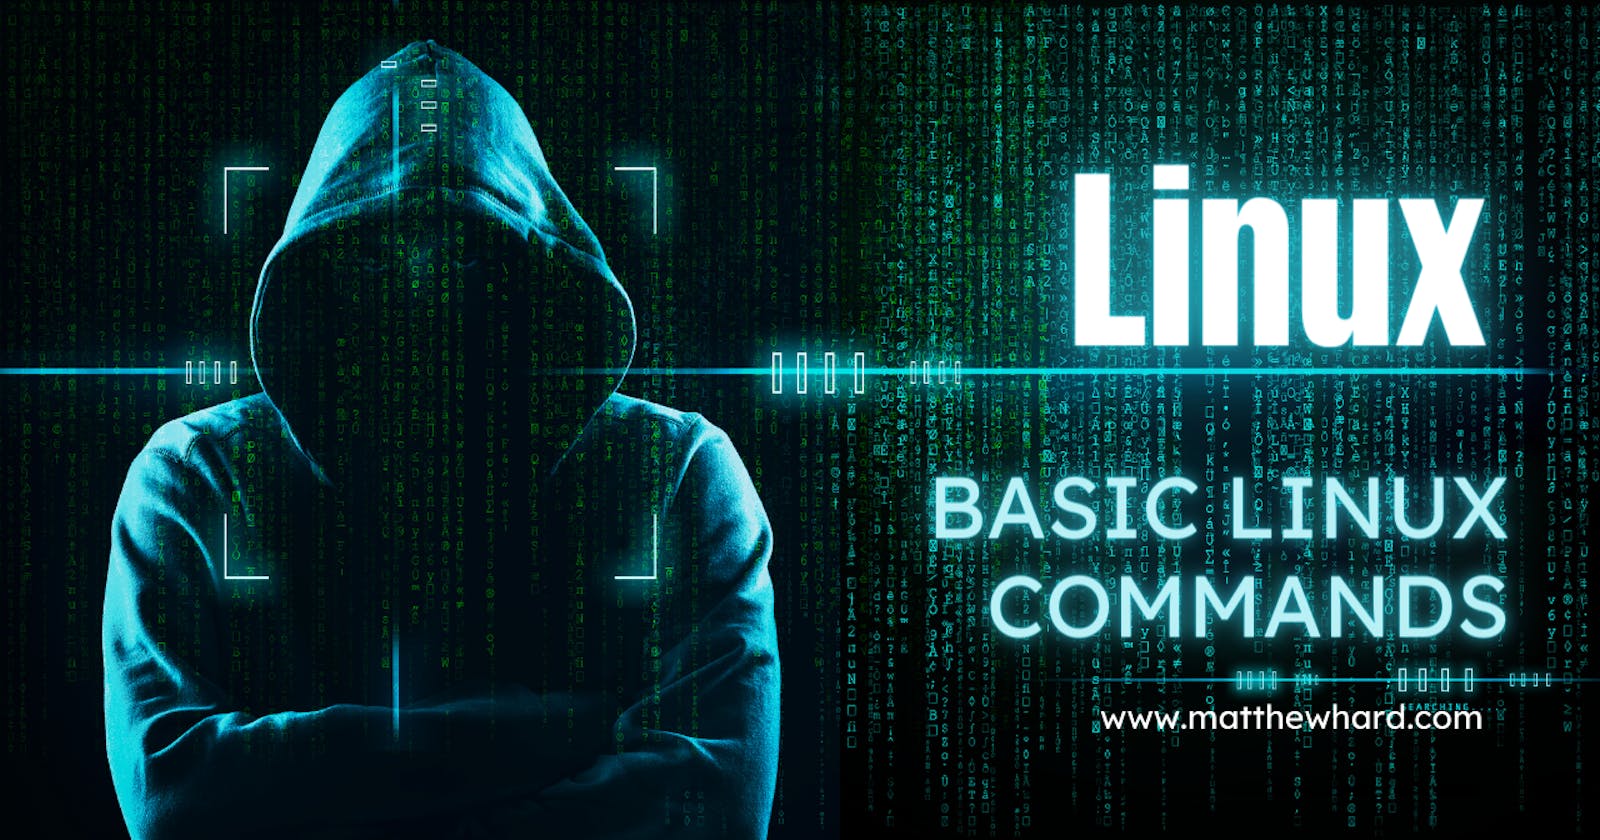 Mastering Basic Linux Commands: Network services and tools.